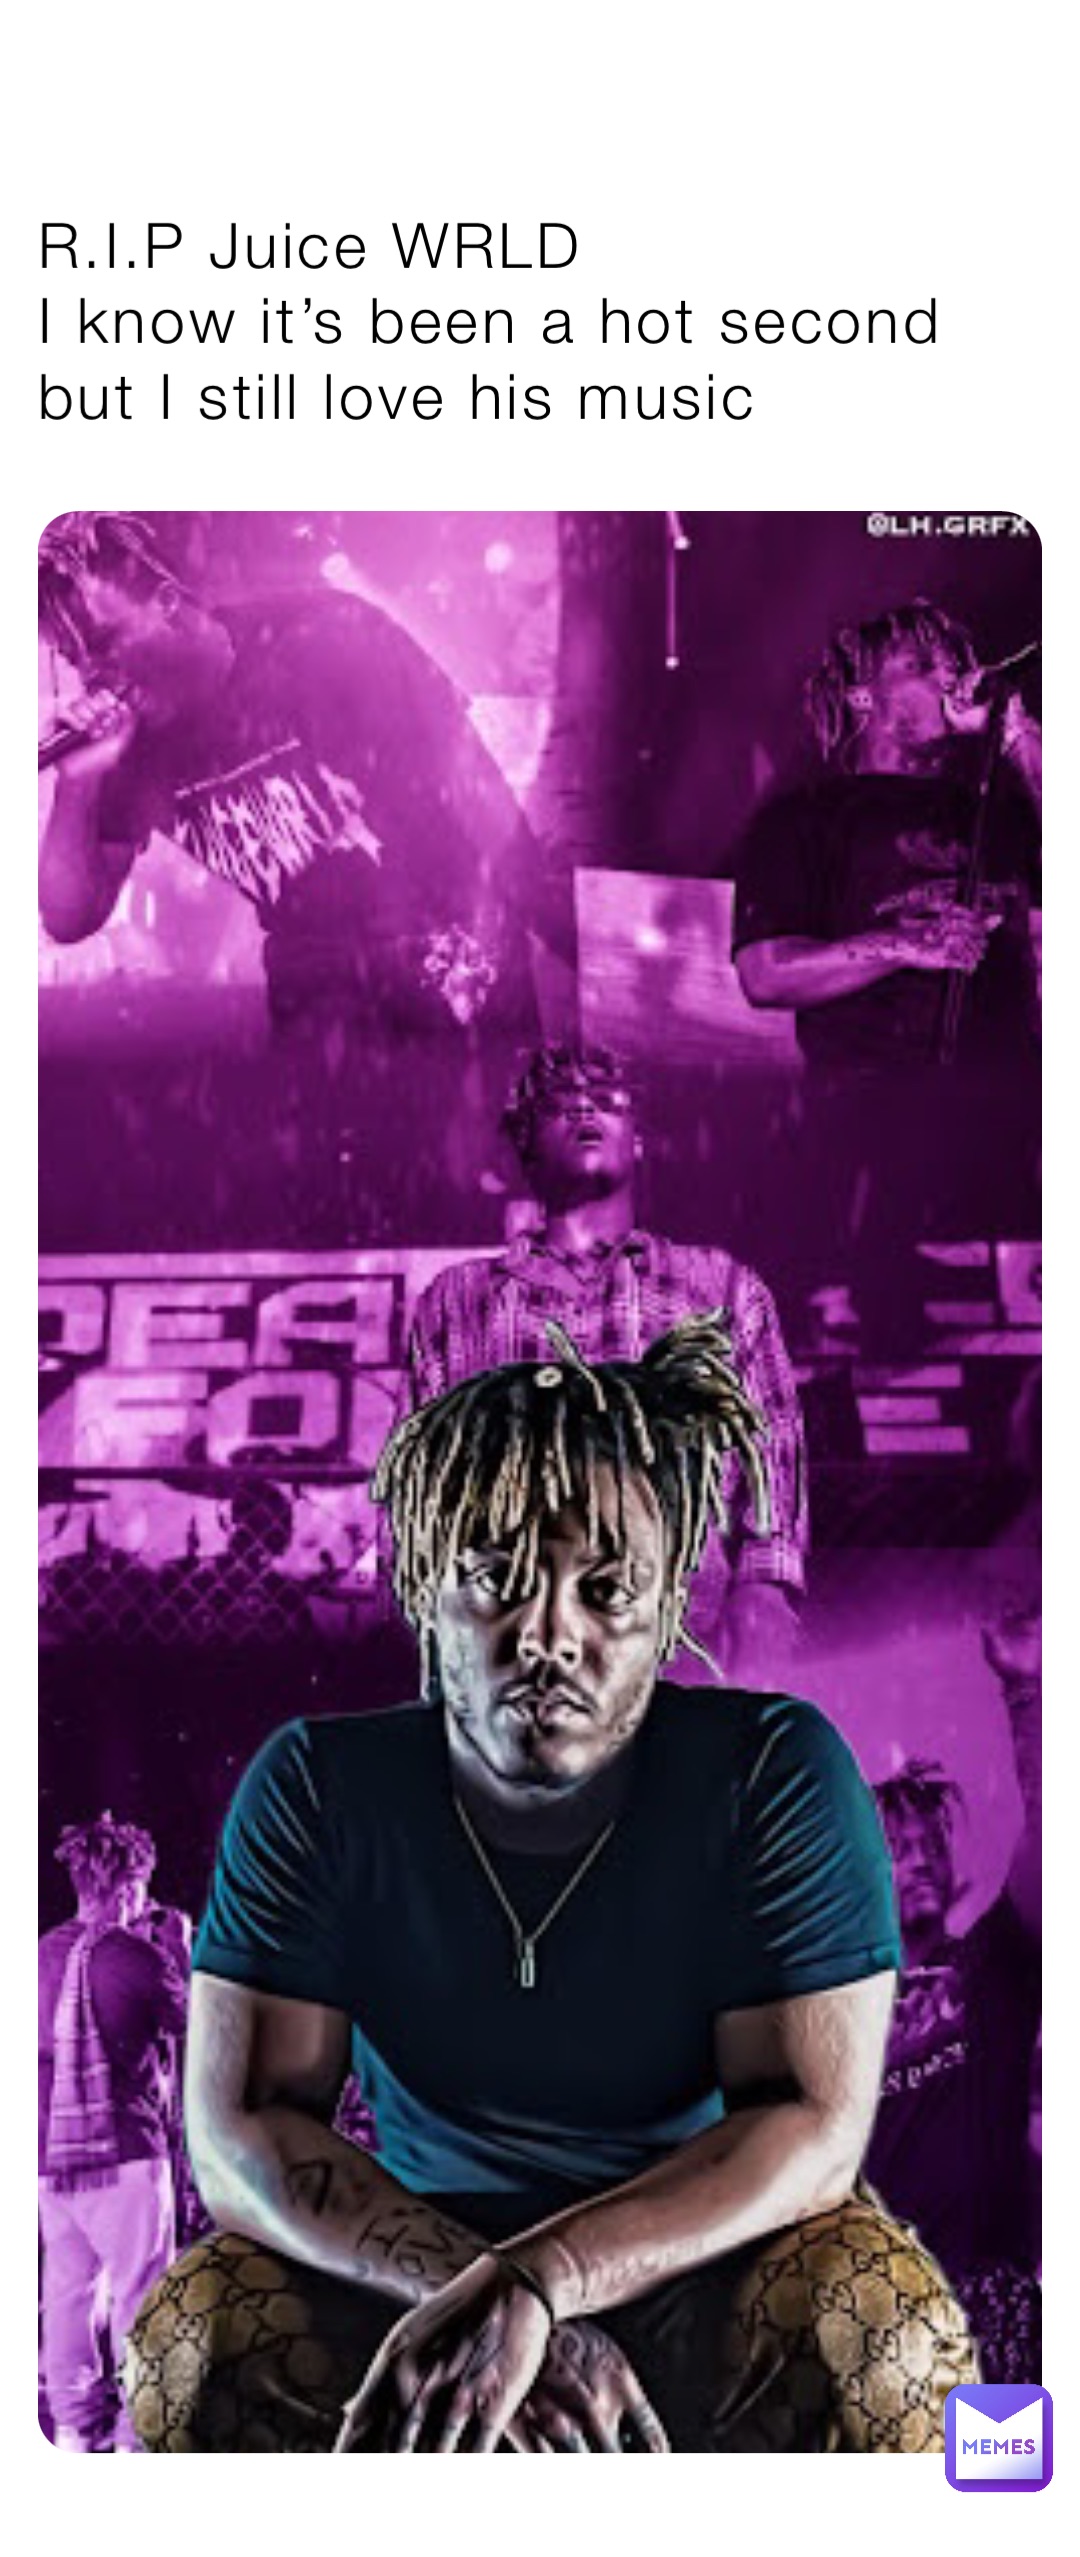 Wallpapers Daily on Twitter All legends fall in the making Juice WRLD  So many idols have passed in recent years and its so sad but also amazing  to see what impact they